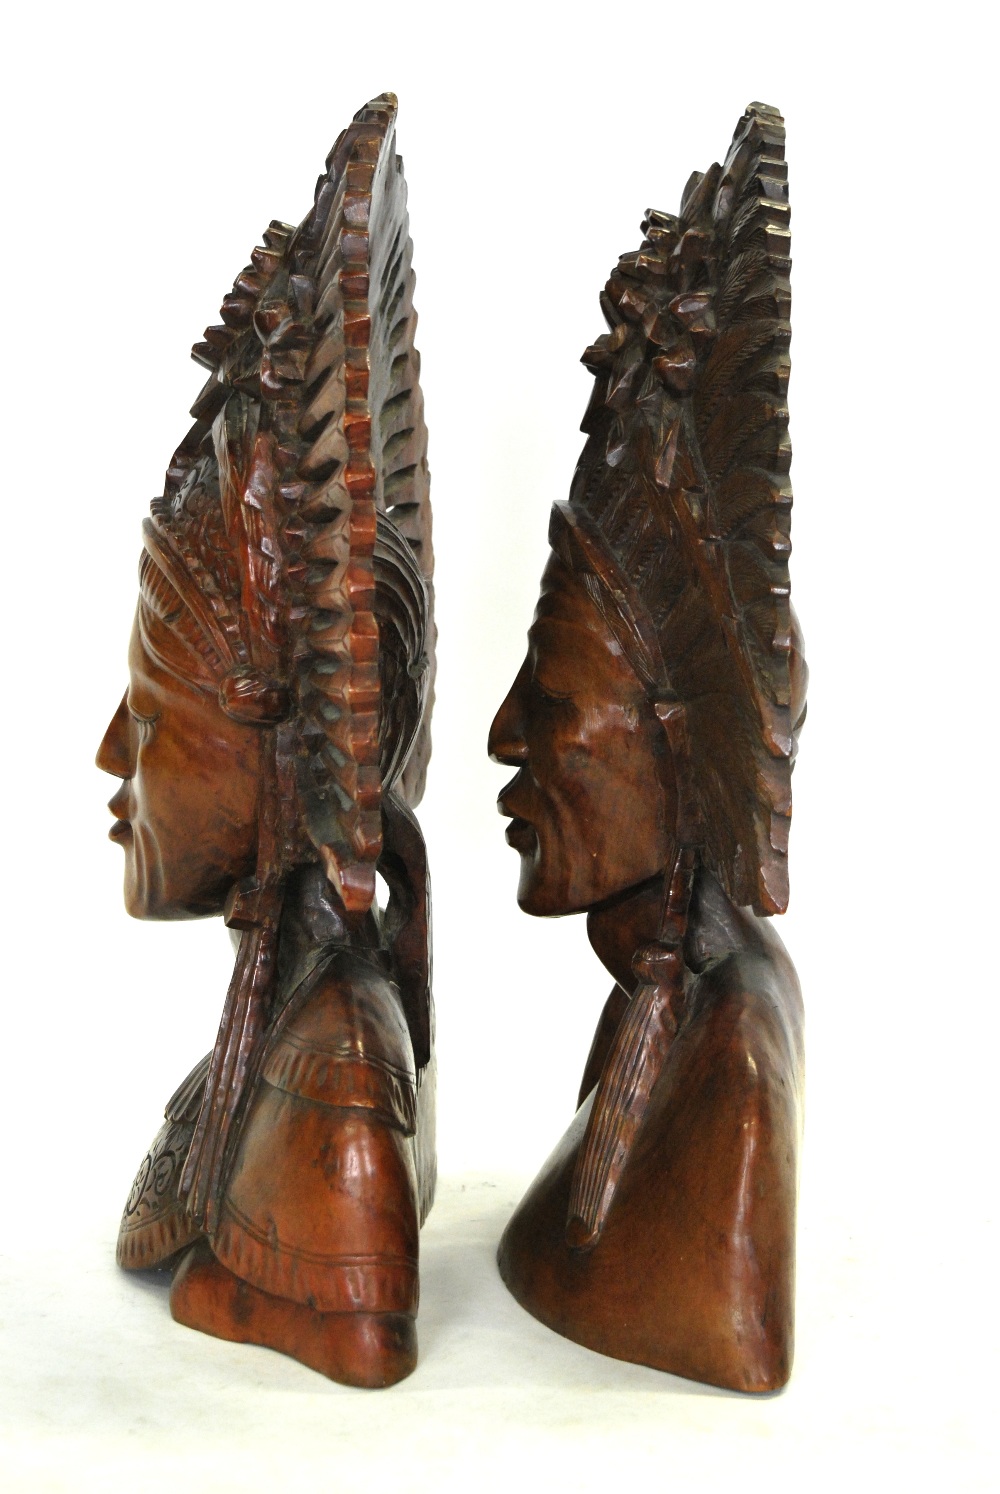 A pair of Balinese carved wood busts with ornate head-dresses, - Image 2 of 4